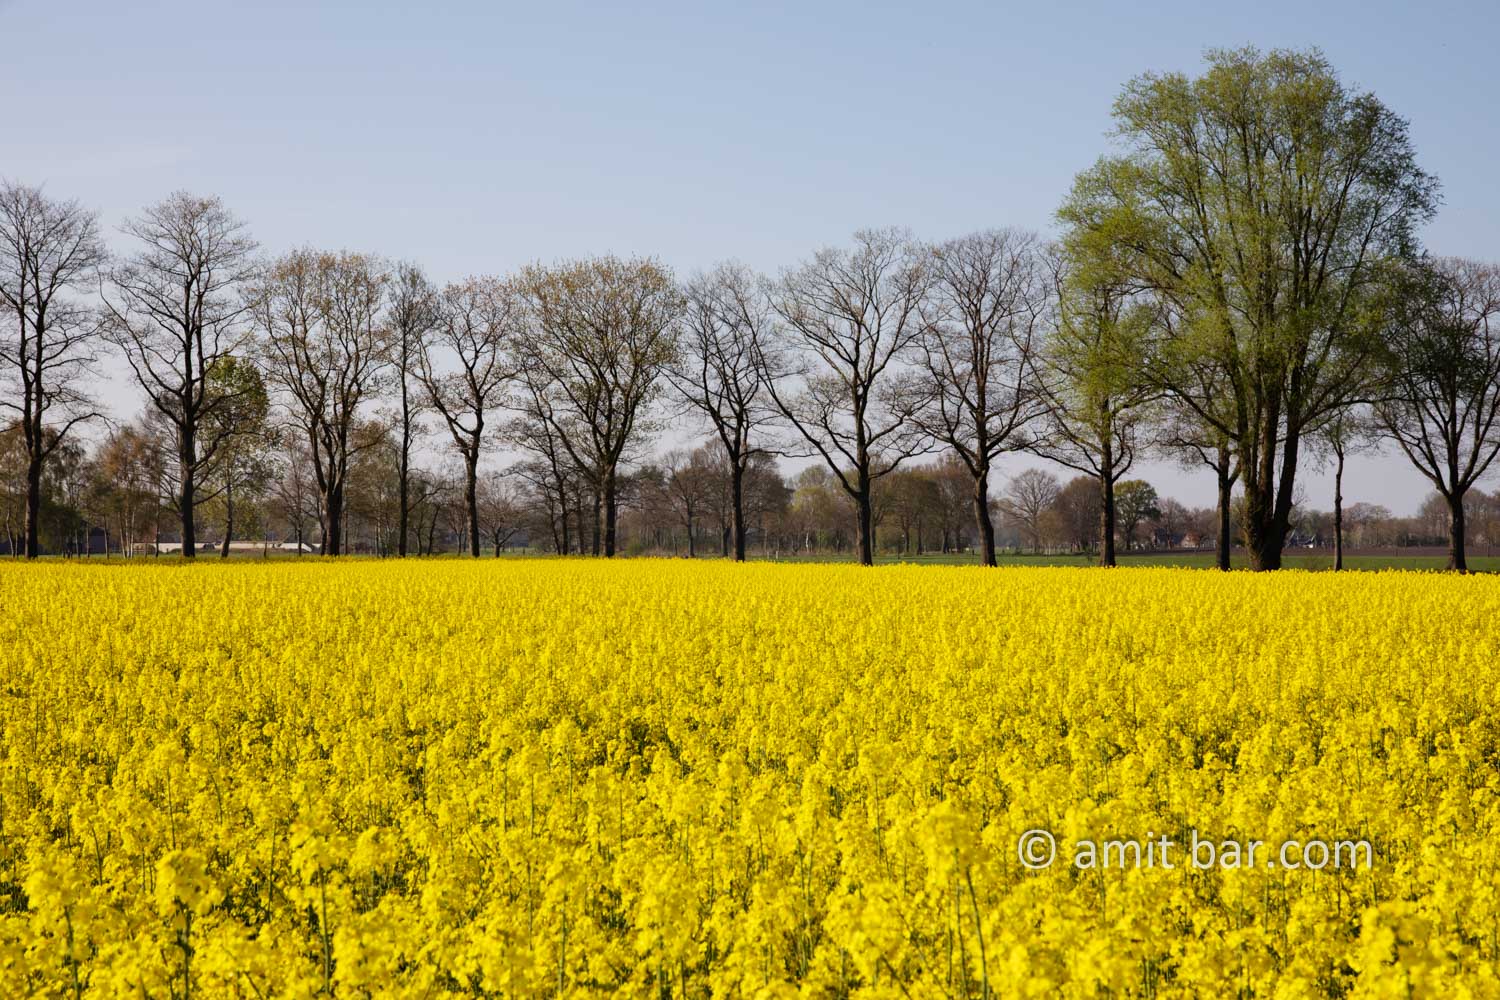 Rapeseed field with oak trees I: Rapeseed field with oak trees at IJzevoorde, The Netherlands in spring time